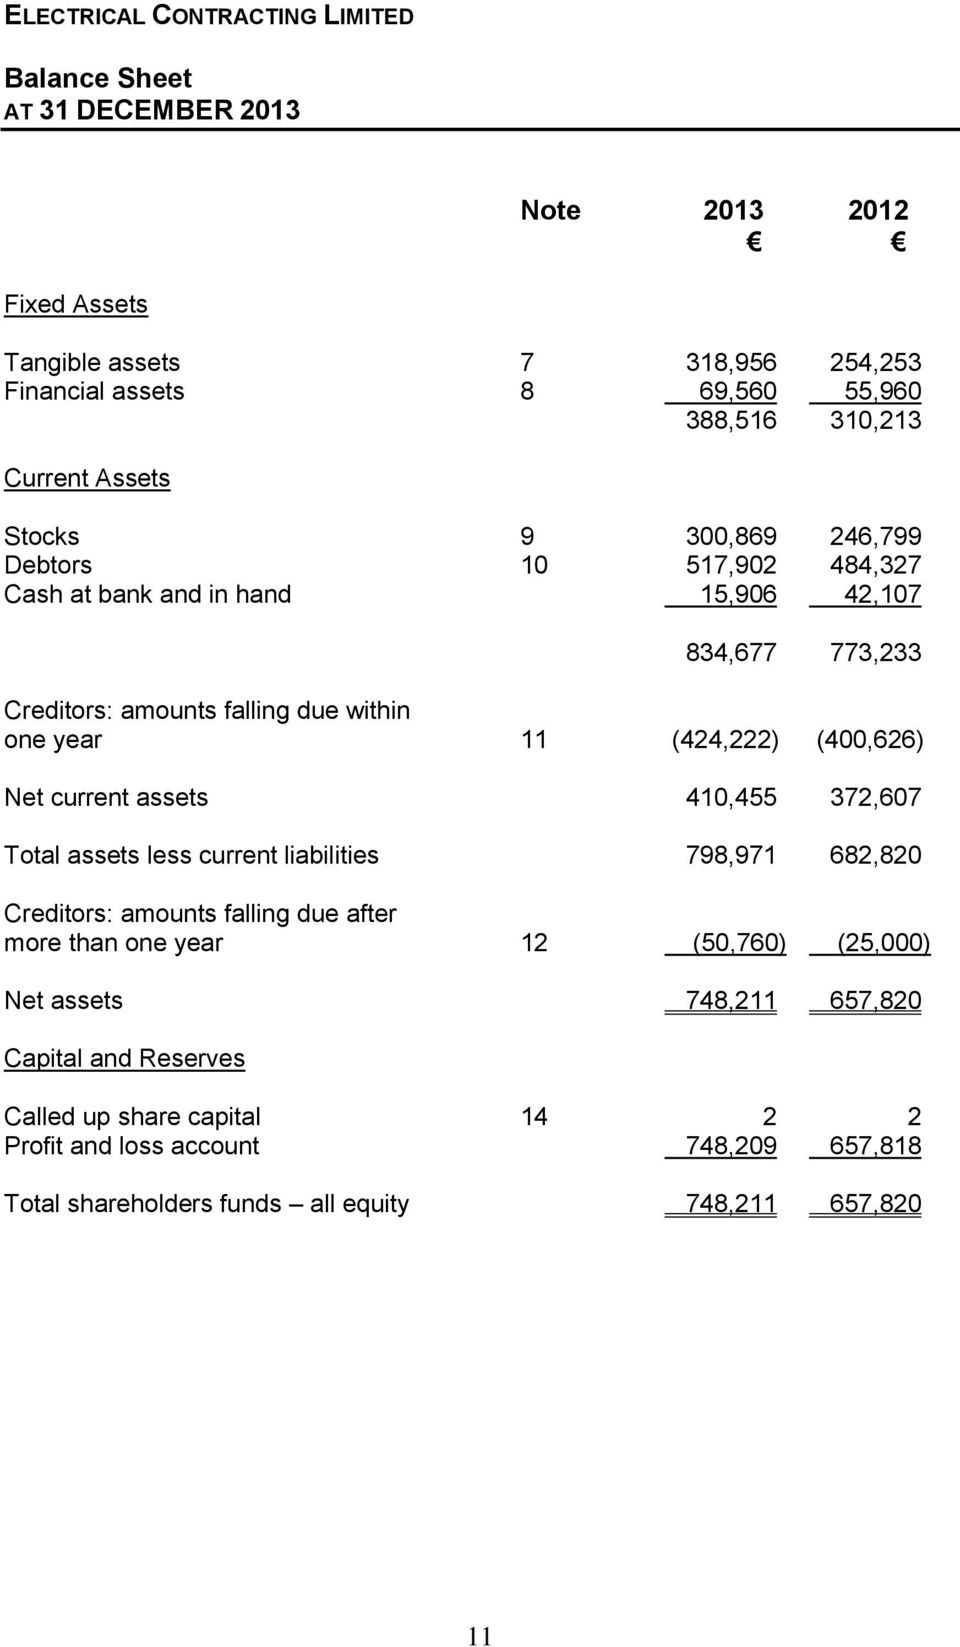 current assets 410,455 372,607 Total assets less current liabilities 798,971 682,820 Creditors: amounts falling due after more than one year 12 (50,760) (25,000) Net